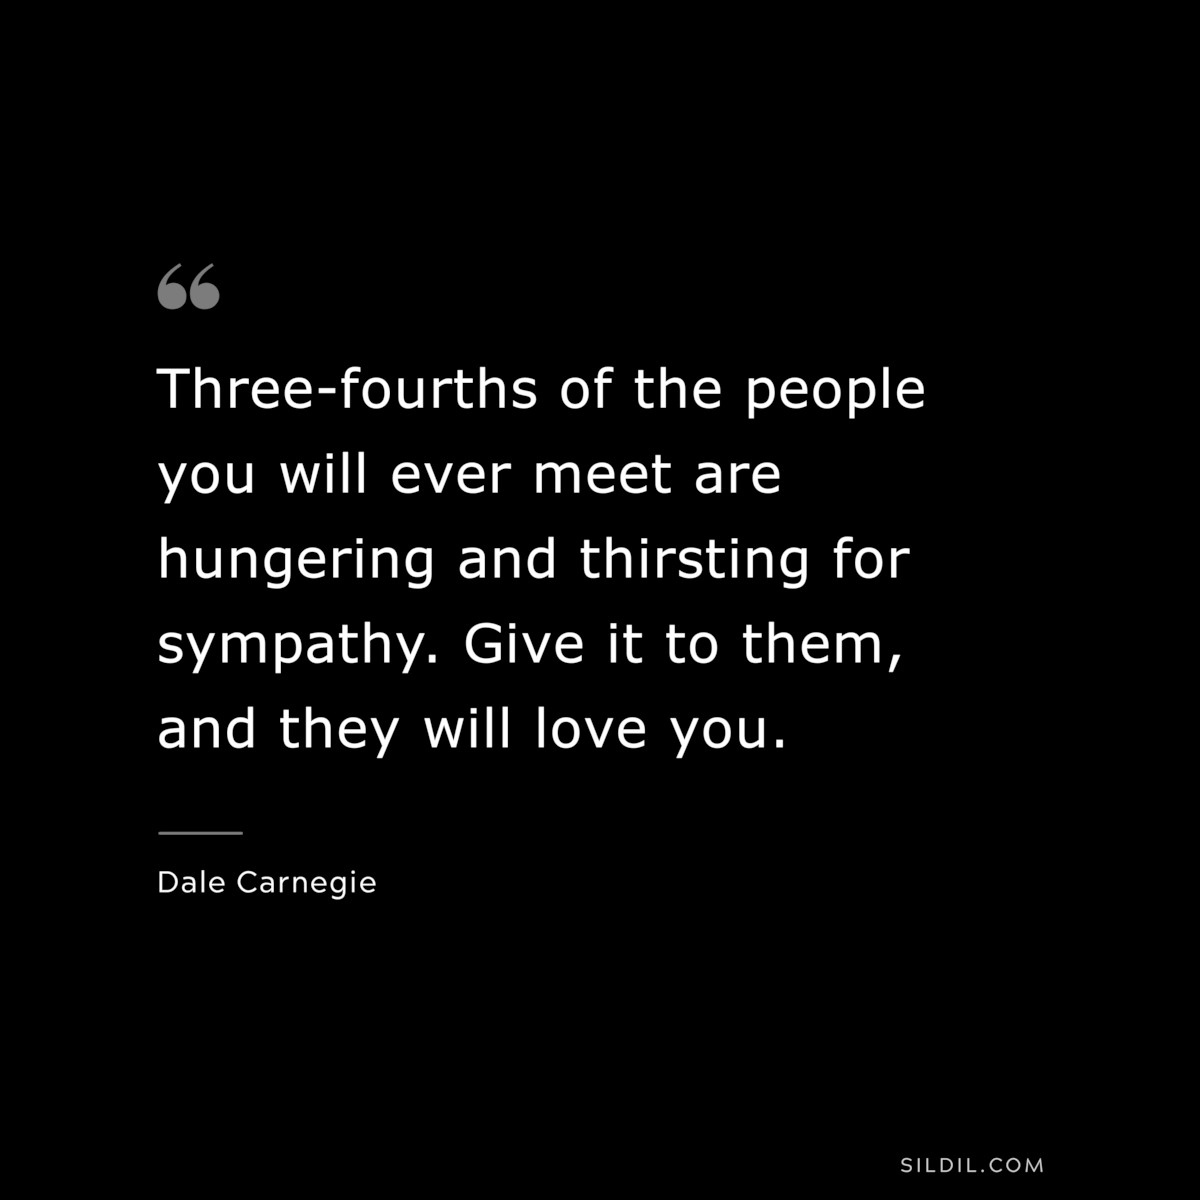 Three-fourths of the people you will ever meet are hungering and thirsting for sympathy. Give it to them, and they will love you.― Dale Carnegie